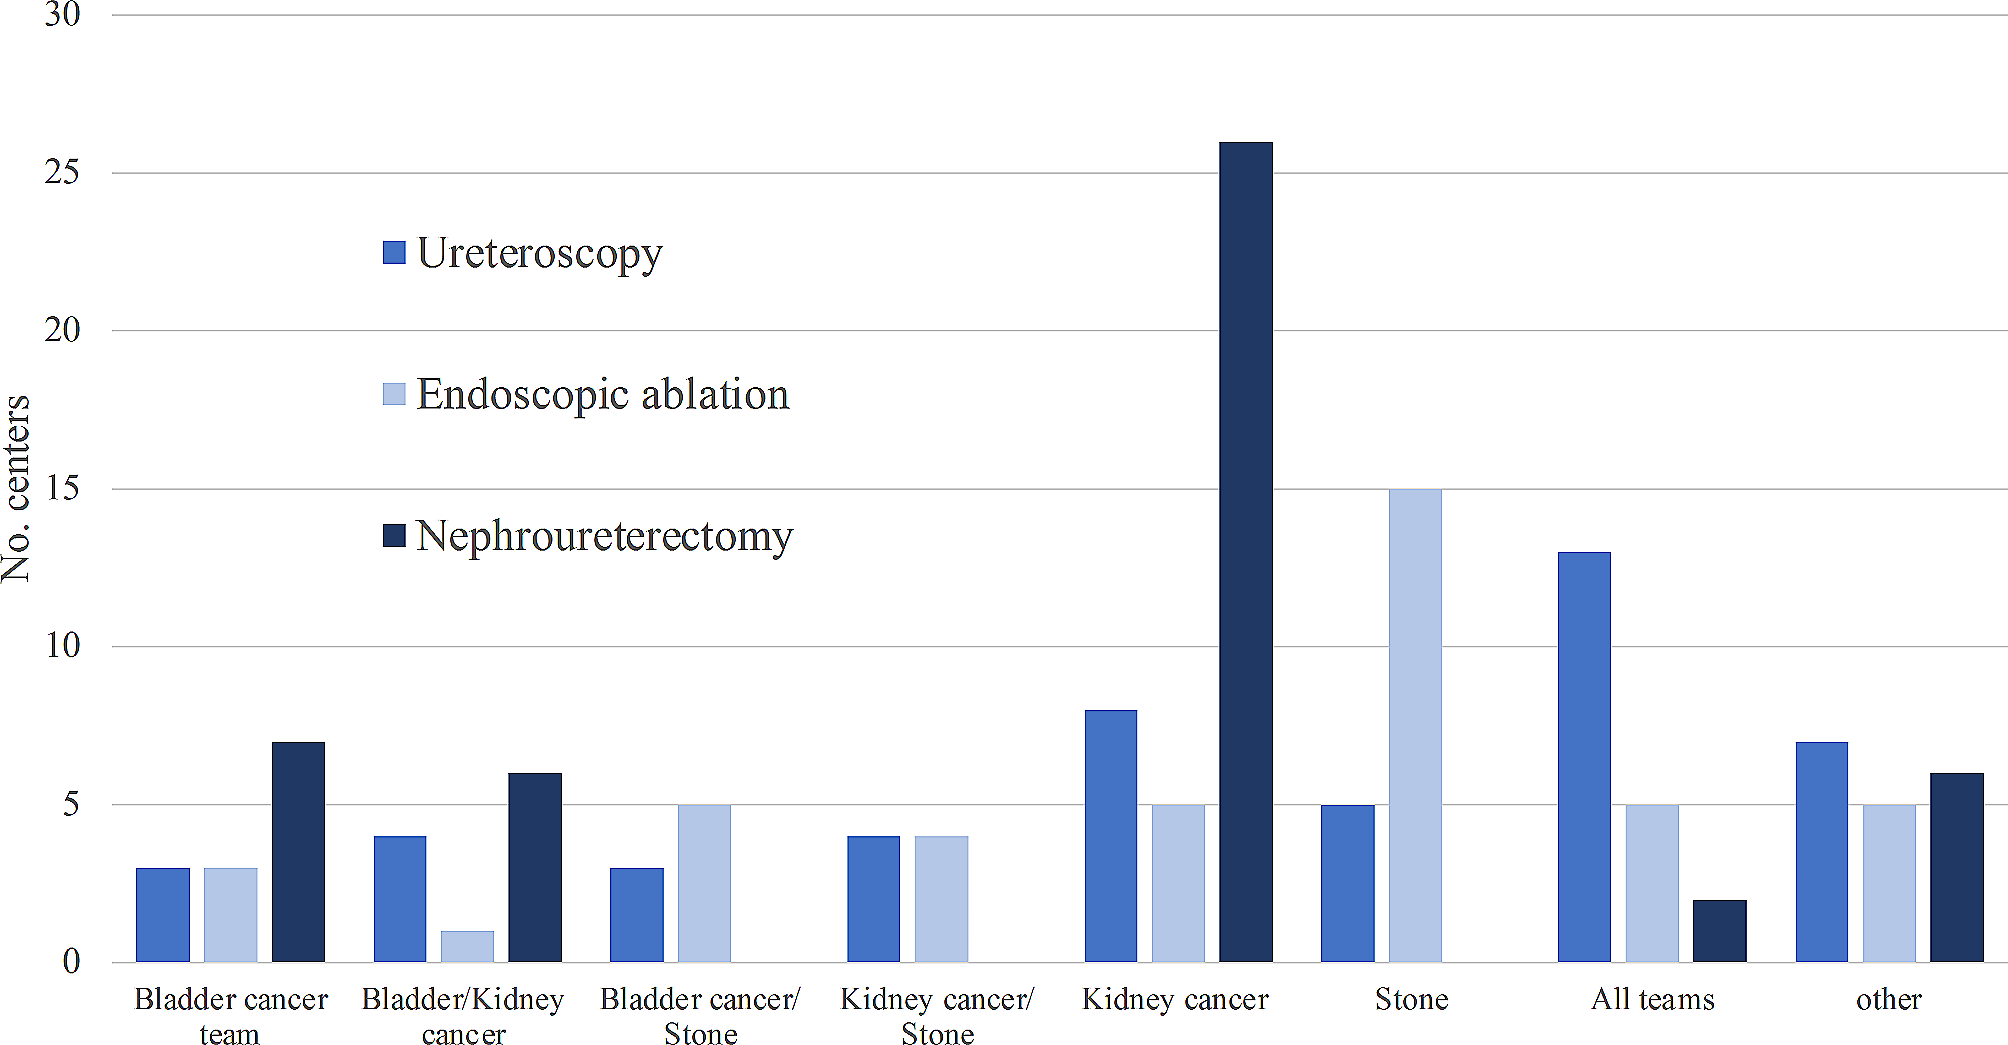 Perioperative management of upper tract urothelial carcinoma in the Nordic countries